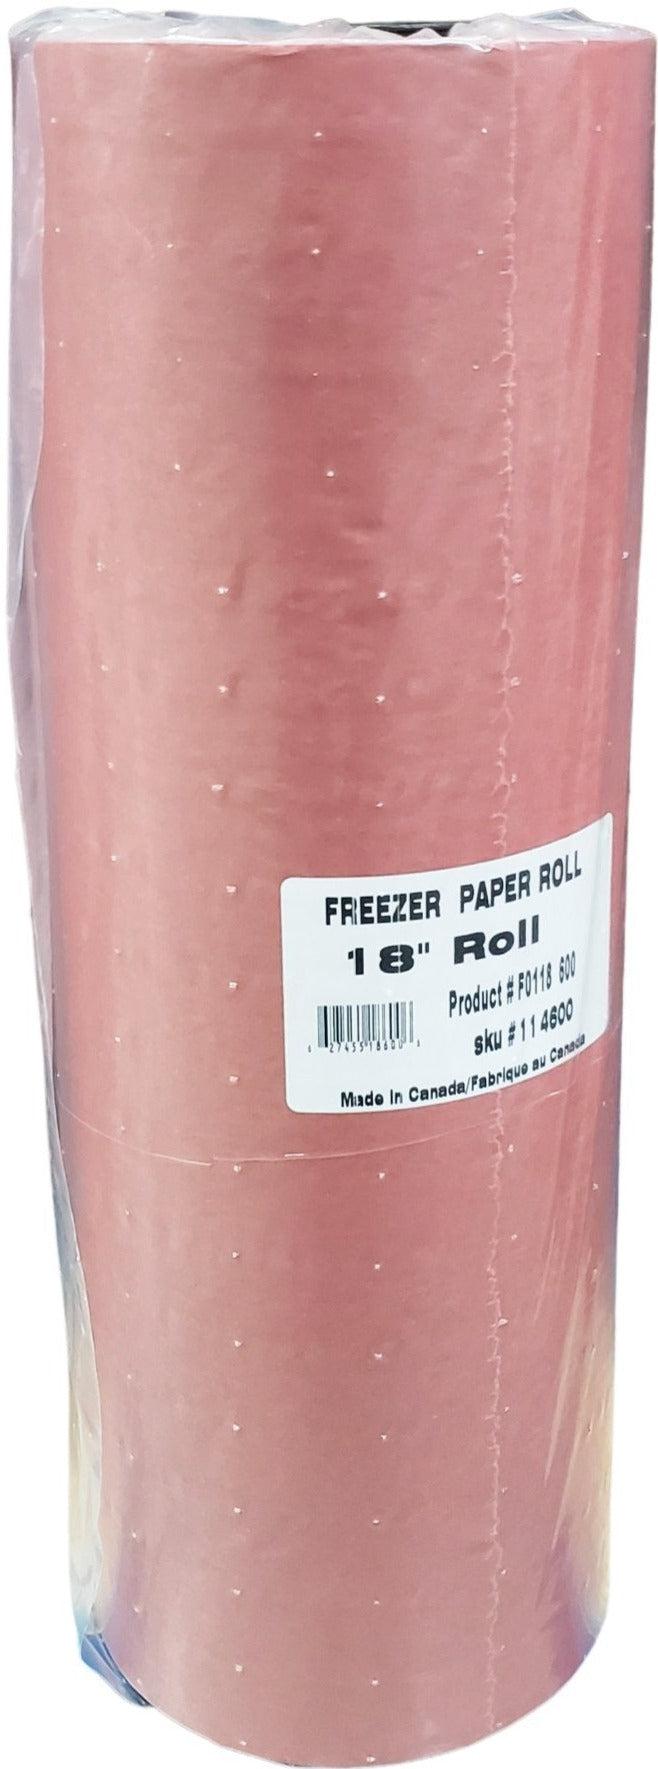 24 x 150' Mini Freezer Paper Roll for Meat and Fish, White buy in